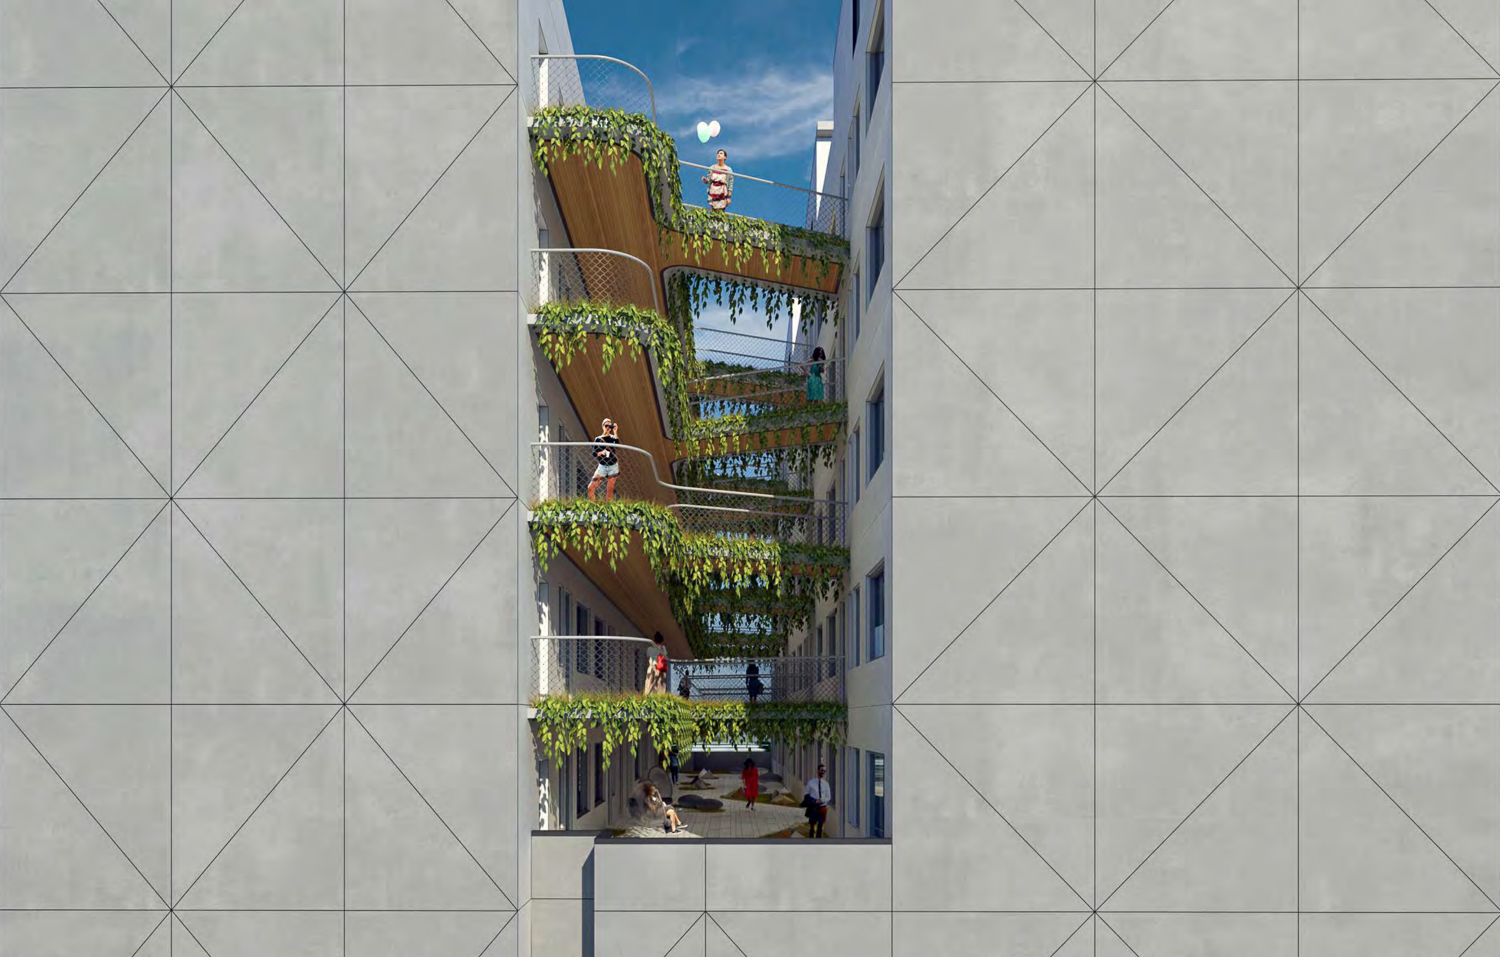 419 4th Street skybridge separation the upper levels, rendering by Lowney Architecture